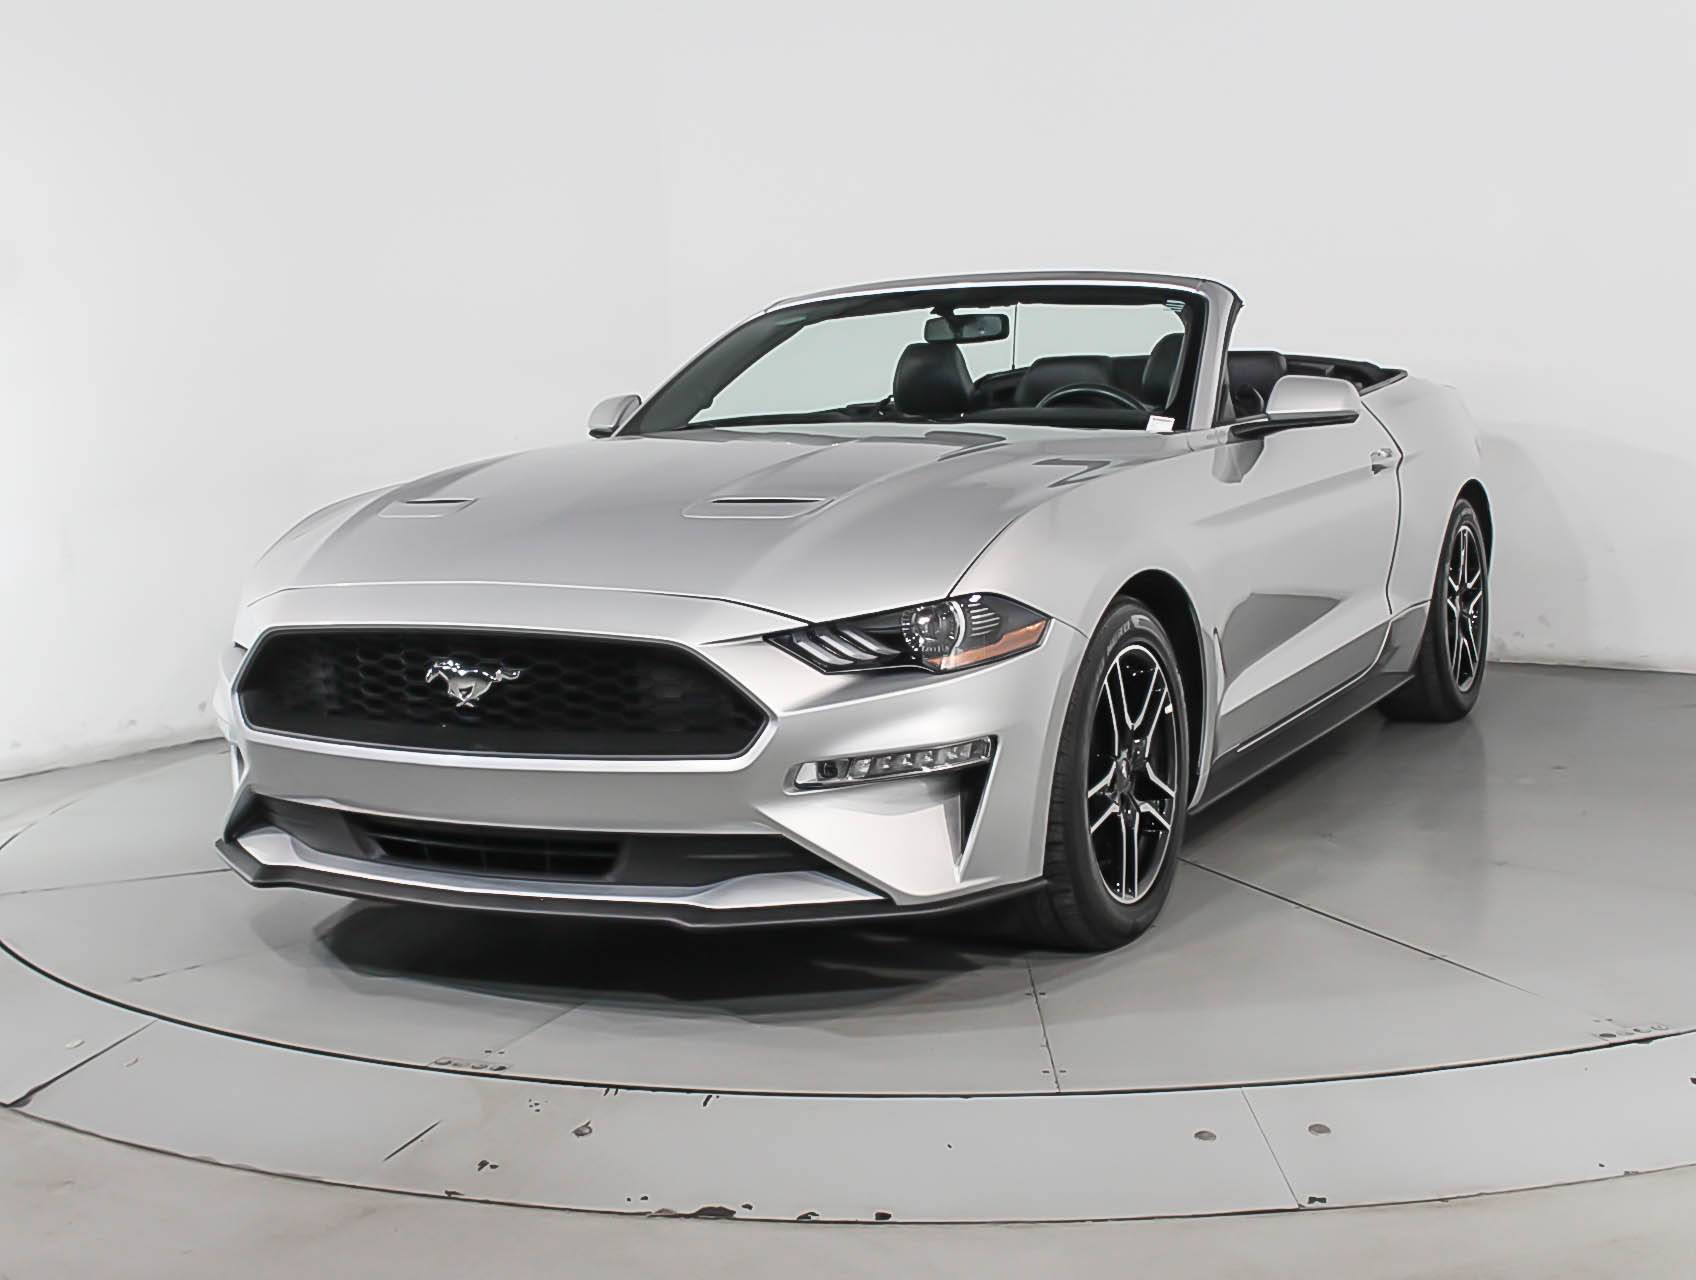 Florida Fine Cars - Used FORD MUSTANG 2018 HOLLYWOOD Ecoboost Premium